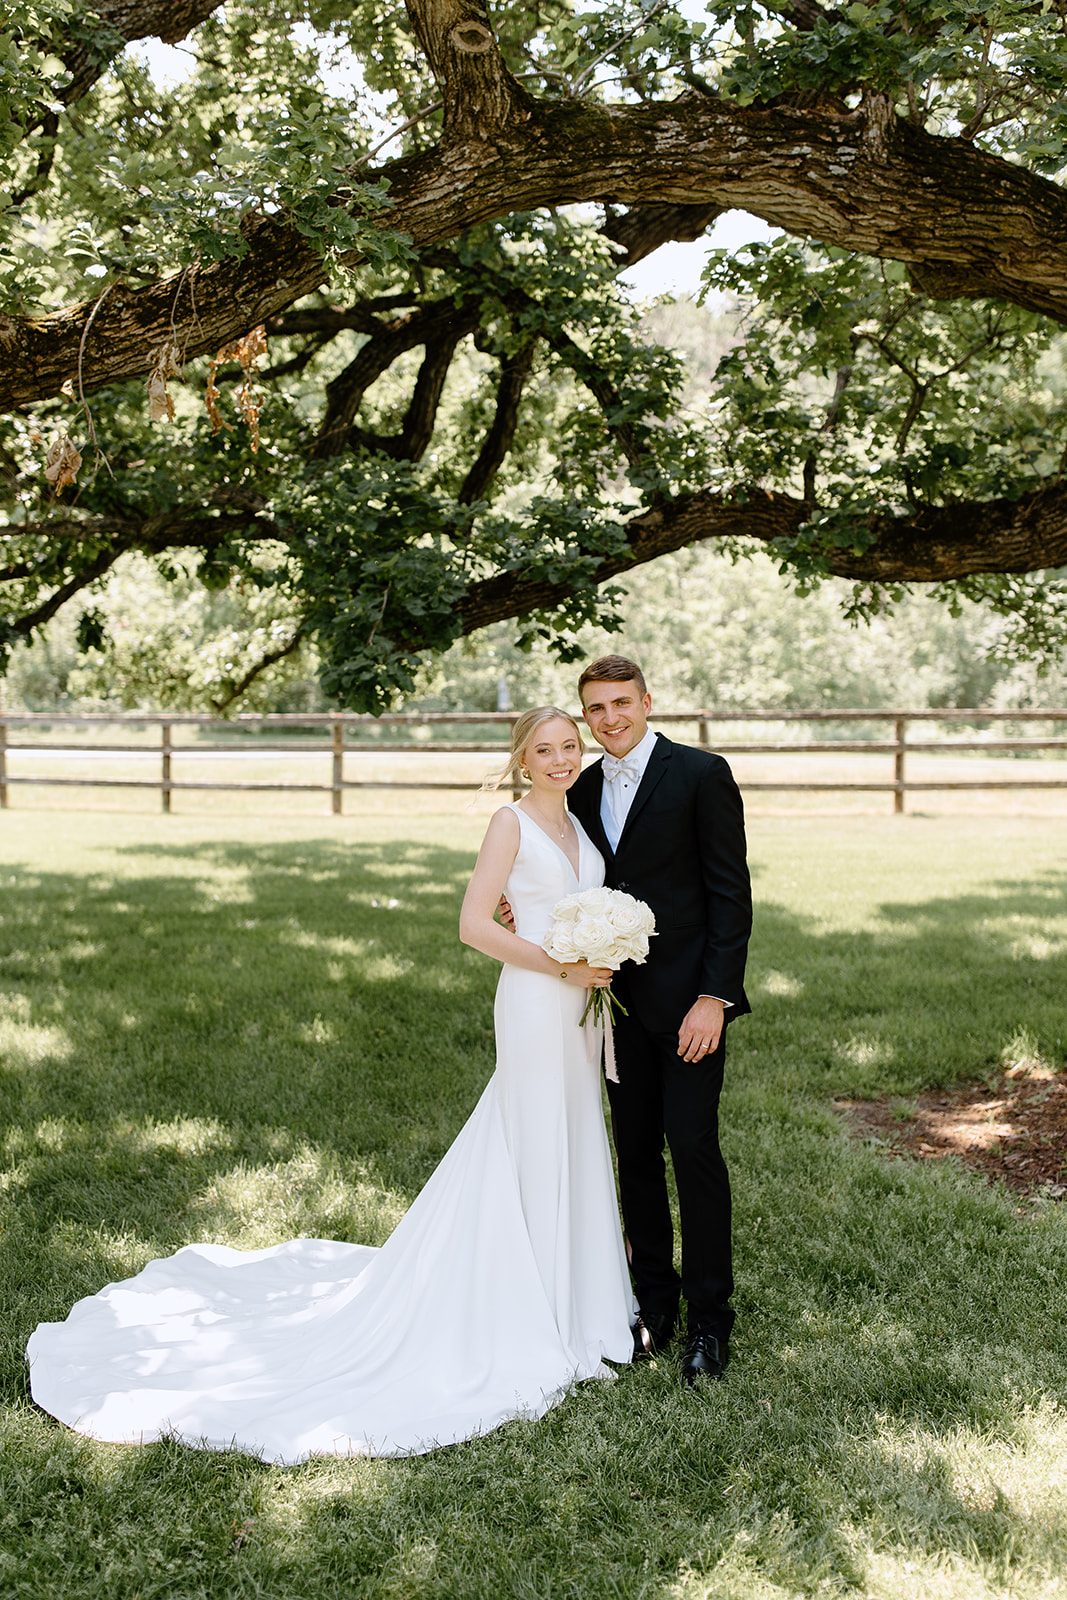 Bride and groom smile under a tree